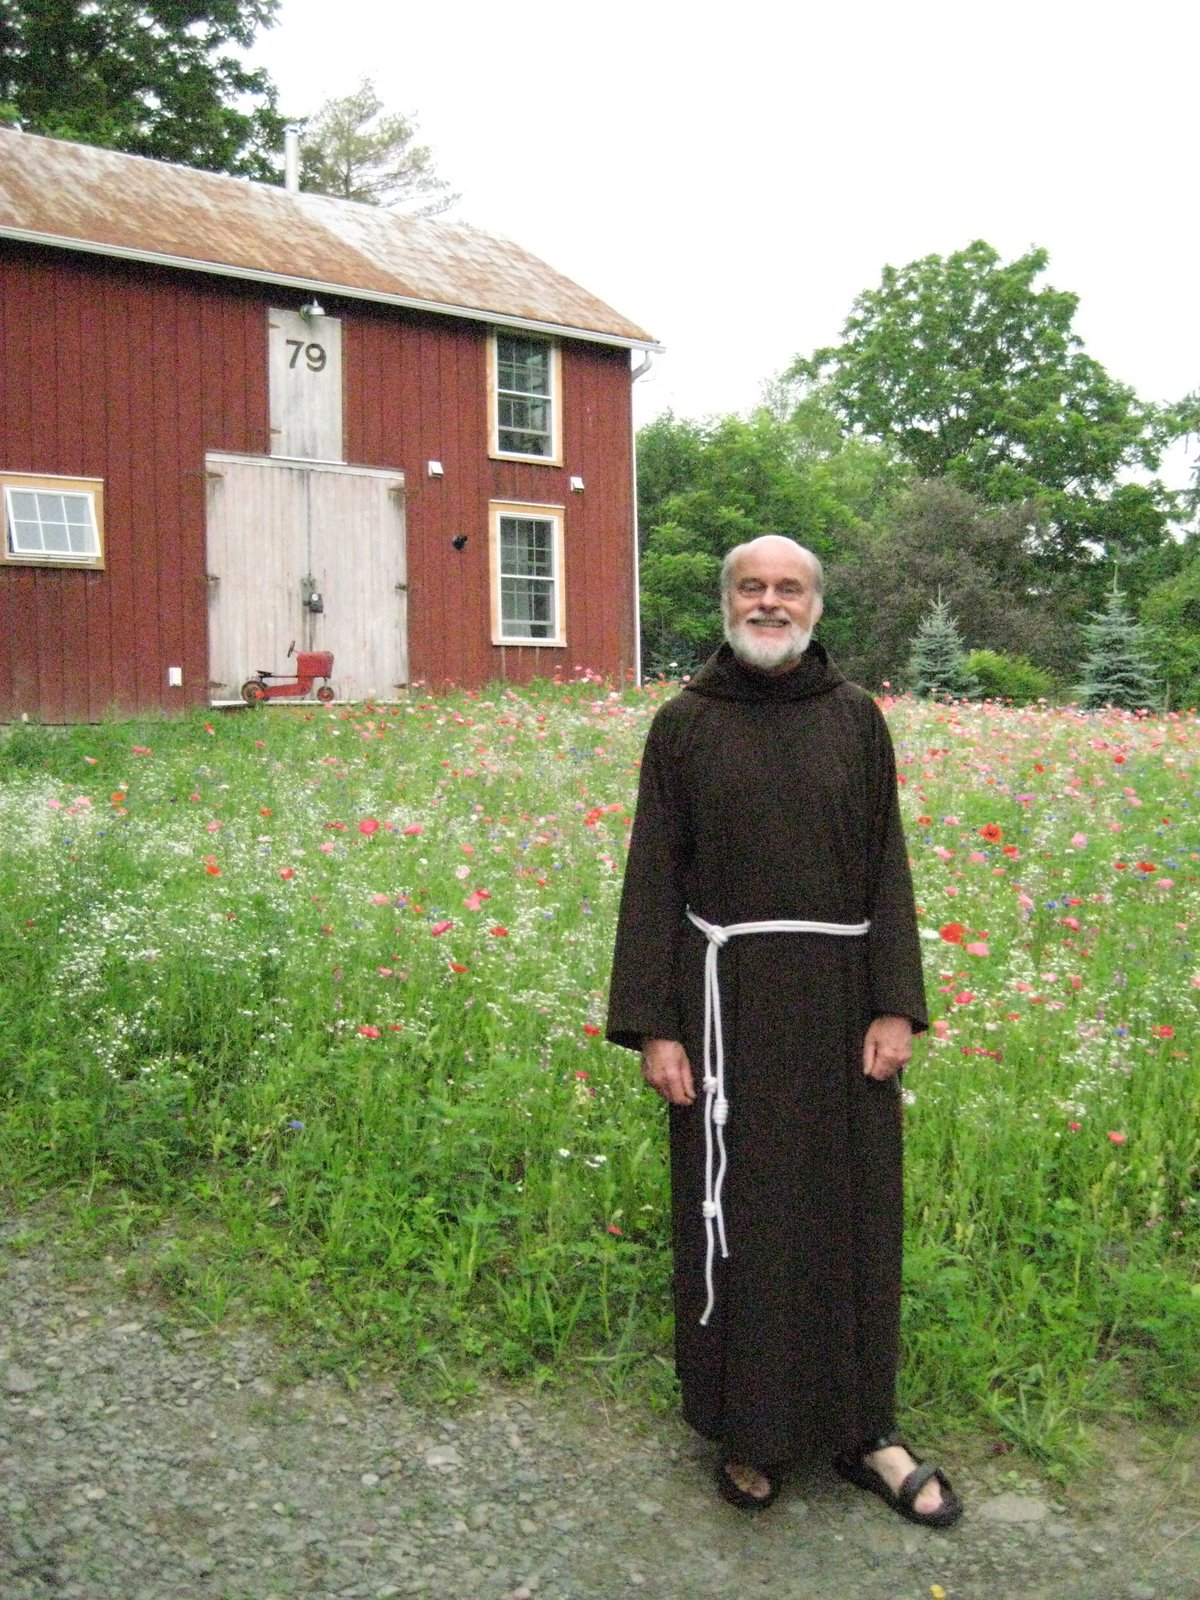 [st+francis+and+the+red+barn]